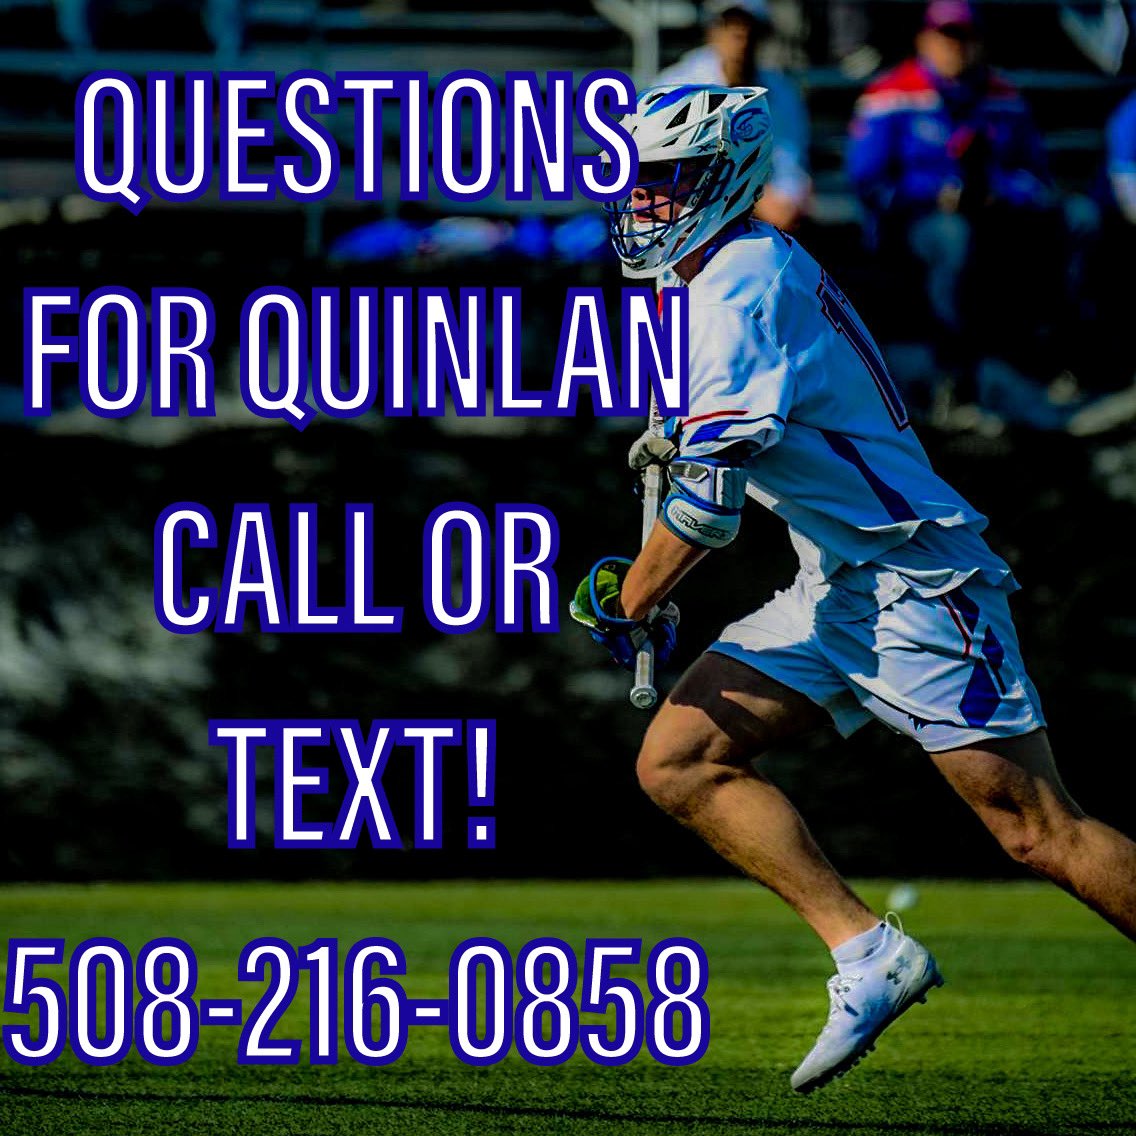 Still need your questions for UMass Lowell Men’s Lax player, Ryan Quinlan! Recording Thursday night so call or text ASAP! @SC_Varsity #sportspodcast #collegelacrosse #southcoastma